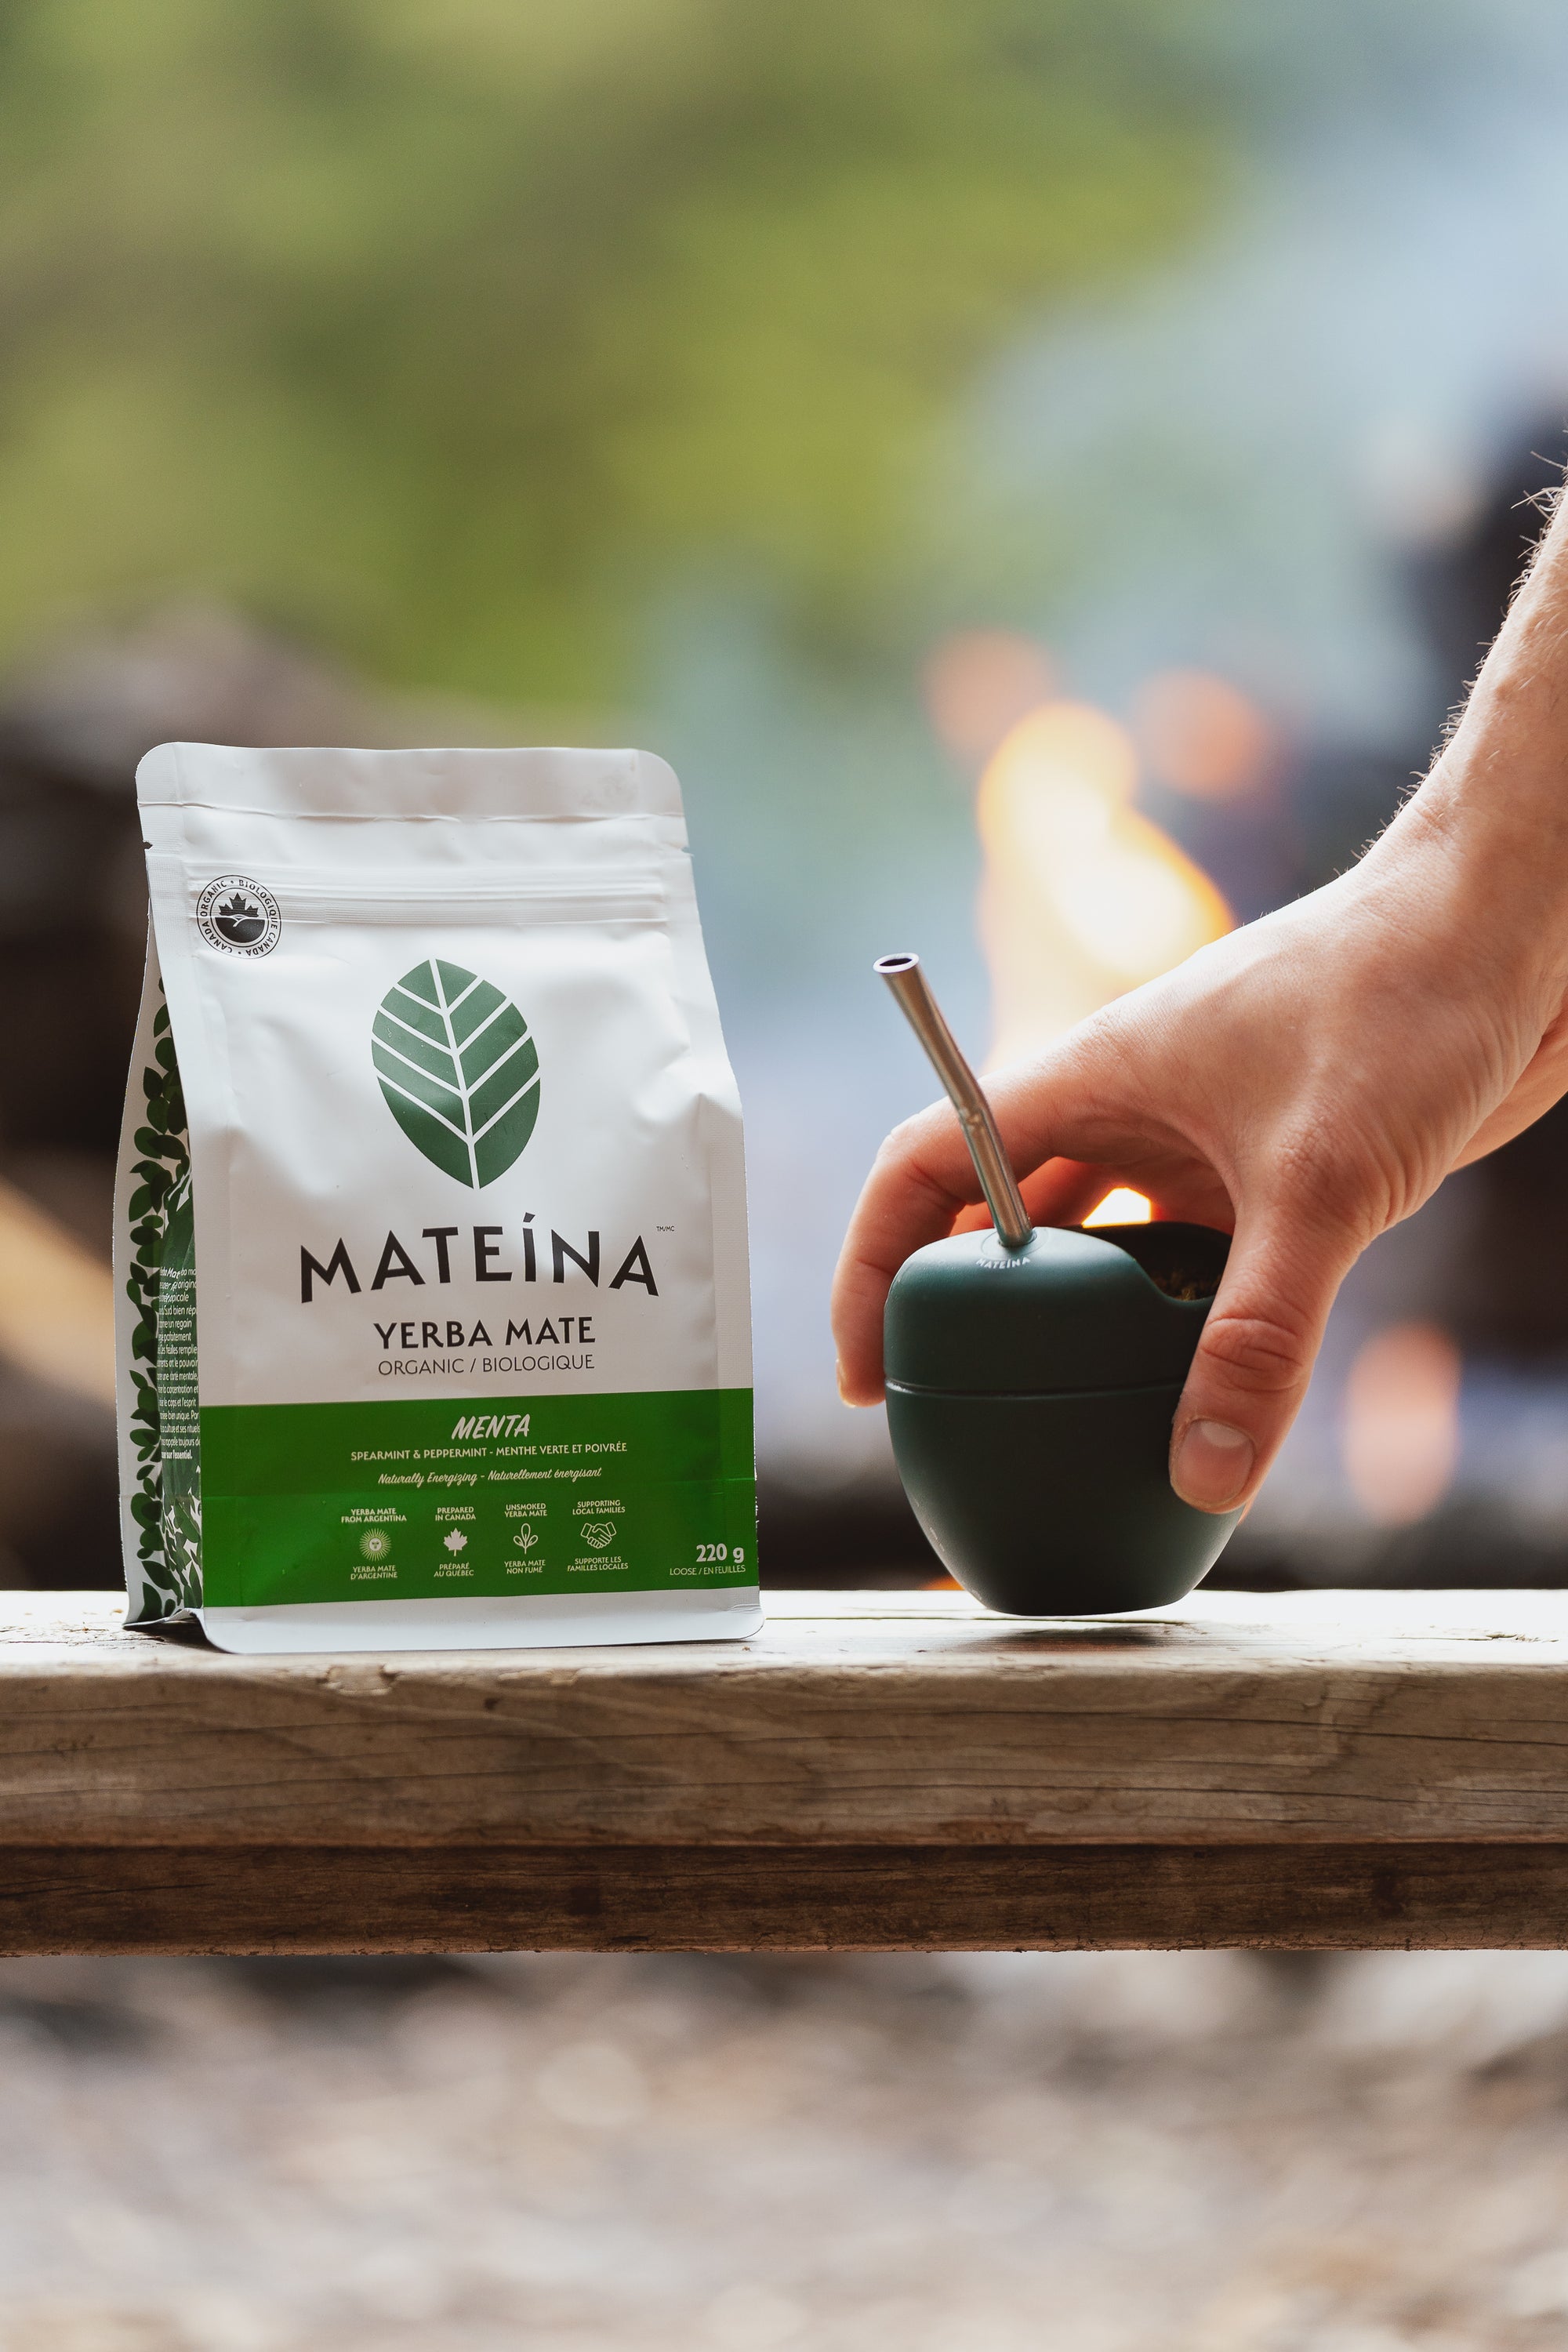 5 reasons to brew yerba mate the traditional way